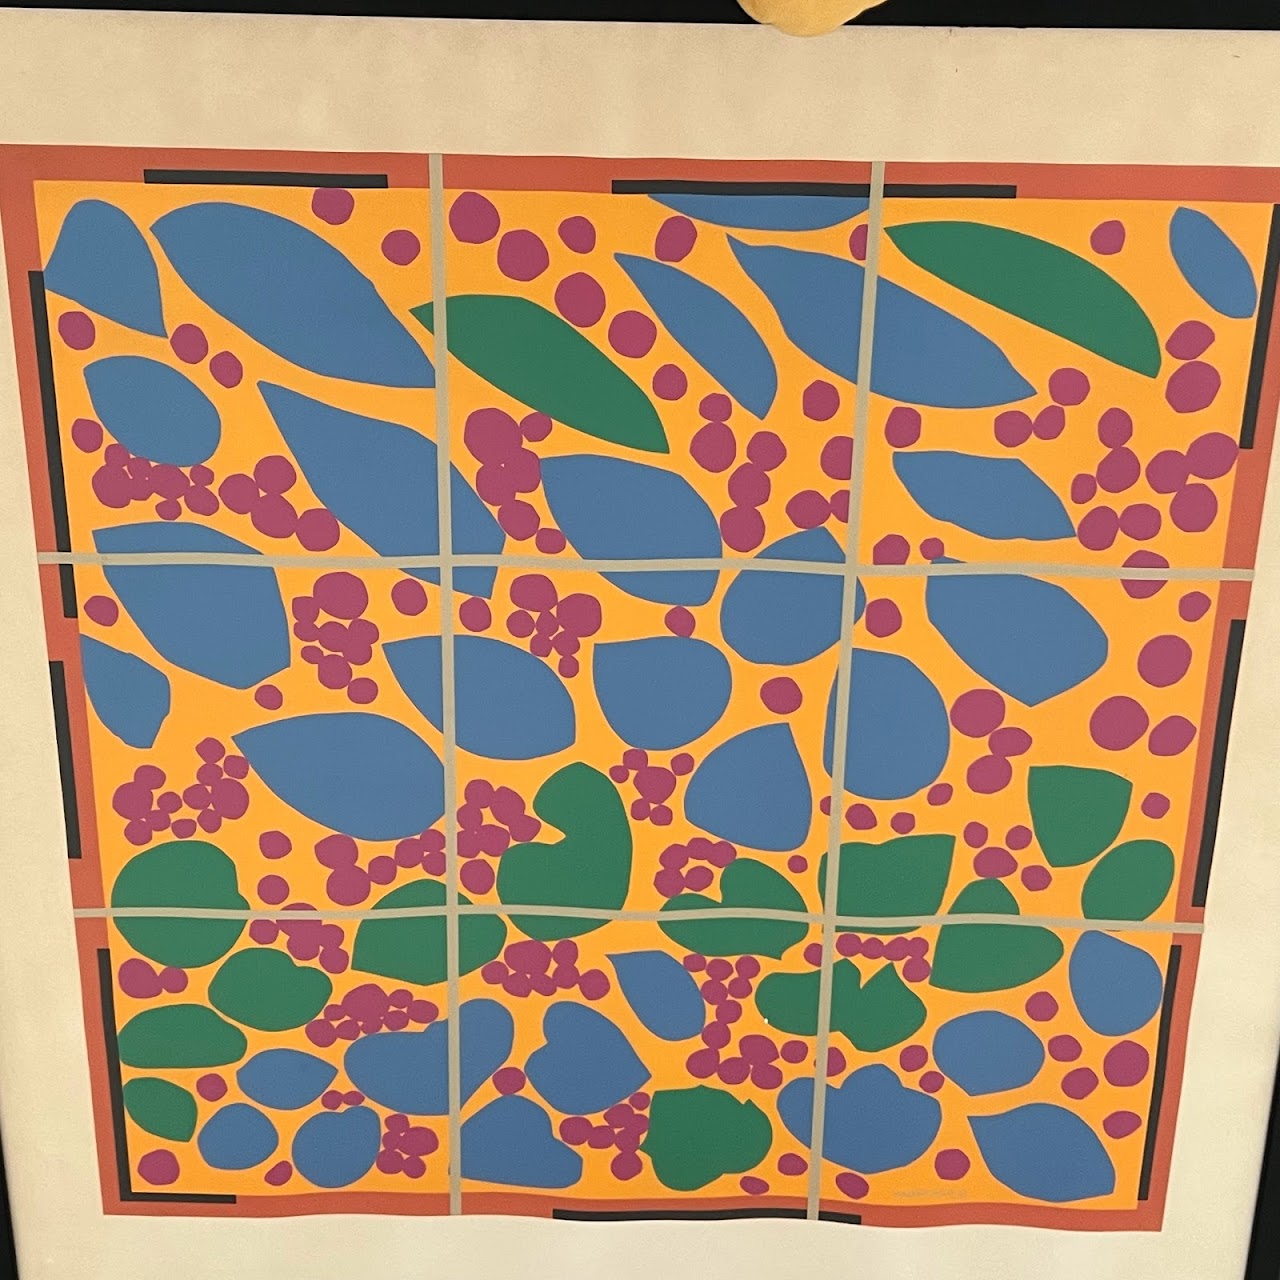 Henry Matisse 'Ivy in Flowers' Dallas Museum of Fine Arts Exhibition Serigraph Poster